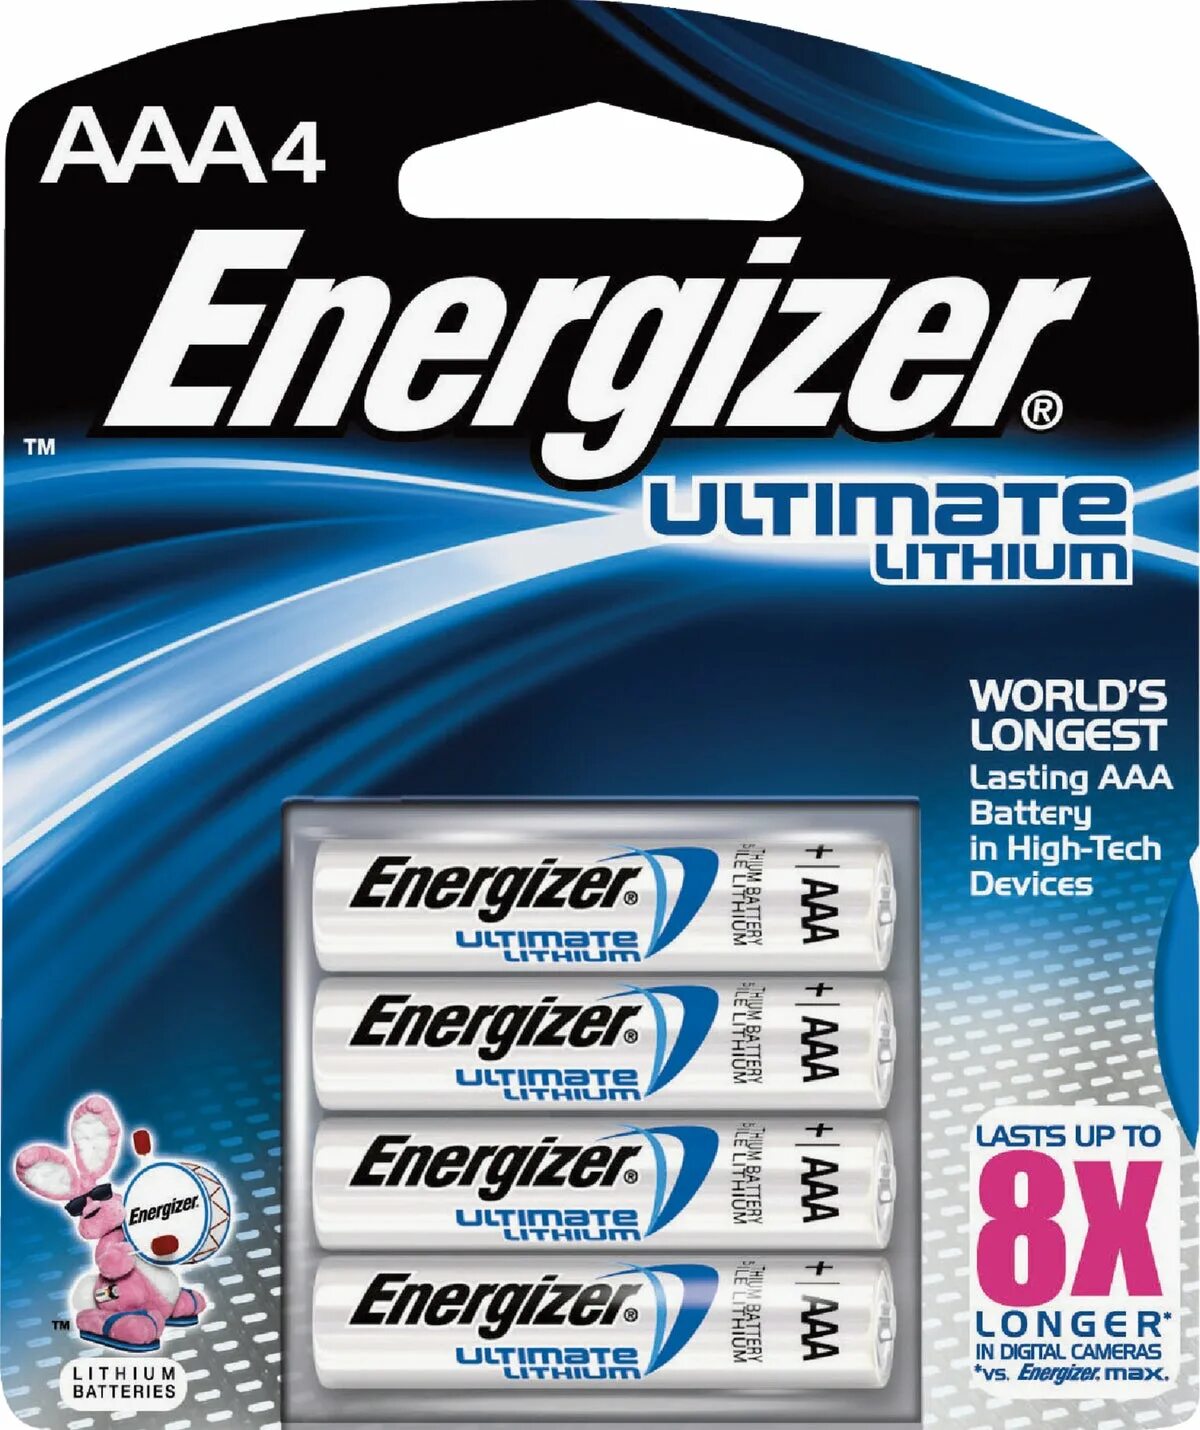 Aaa battery. Energizer Ultimate Lithium fr6. Батарейка Energizer Lithium. Батарейка Energizer Ultimate Lithium AAA. Батарейка Energizer АА 2шт.